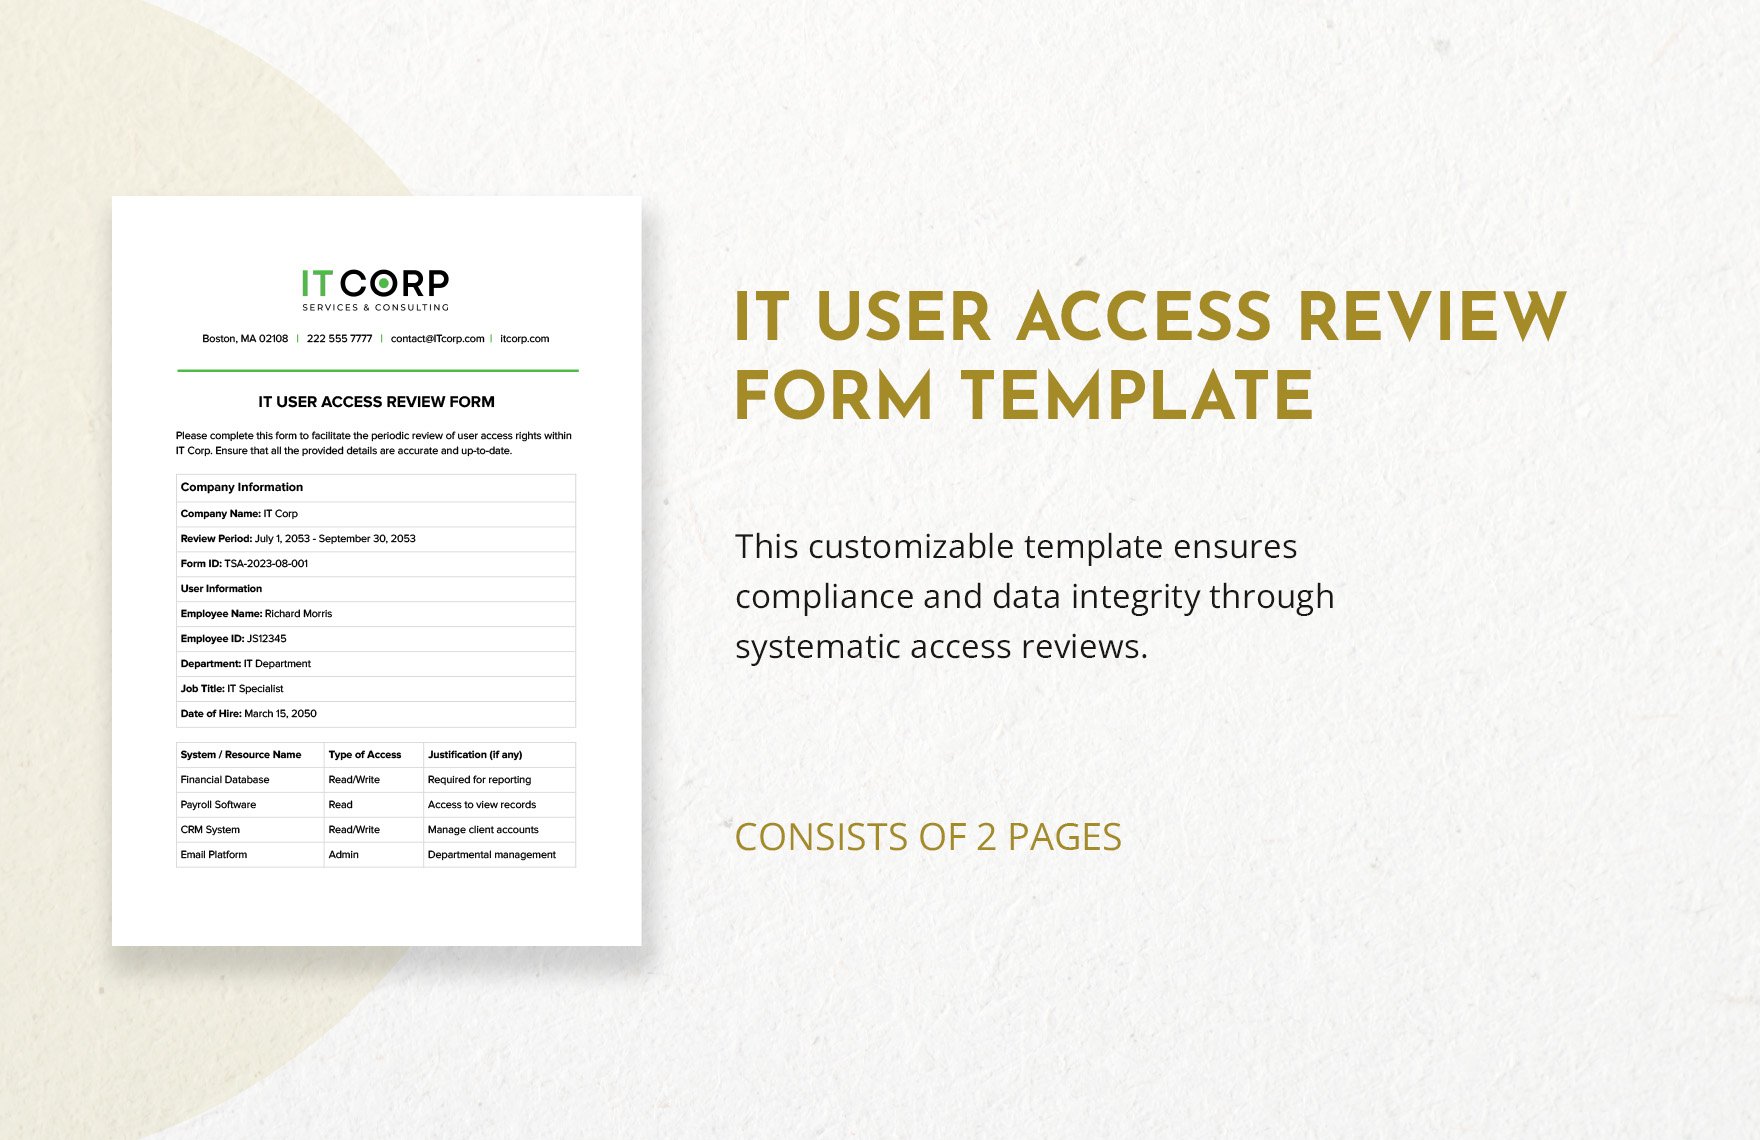 IT User Access Review Form Template